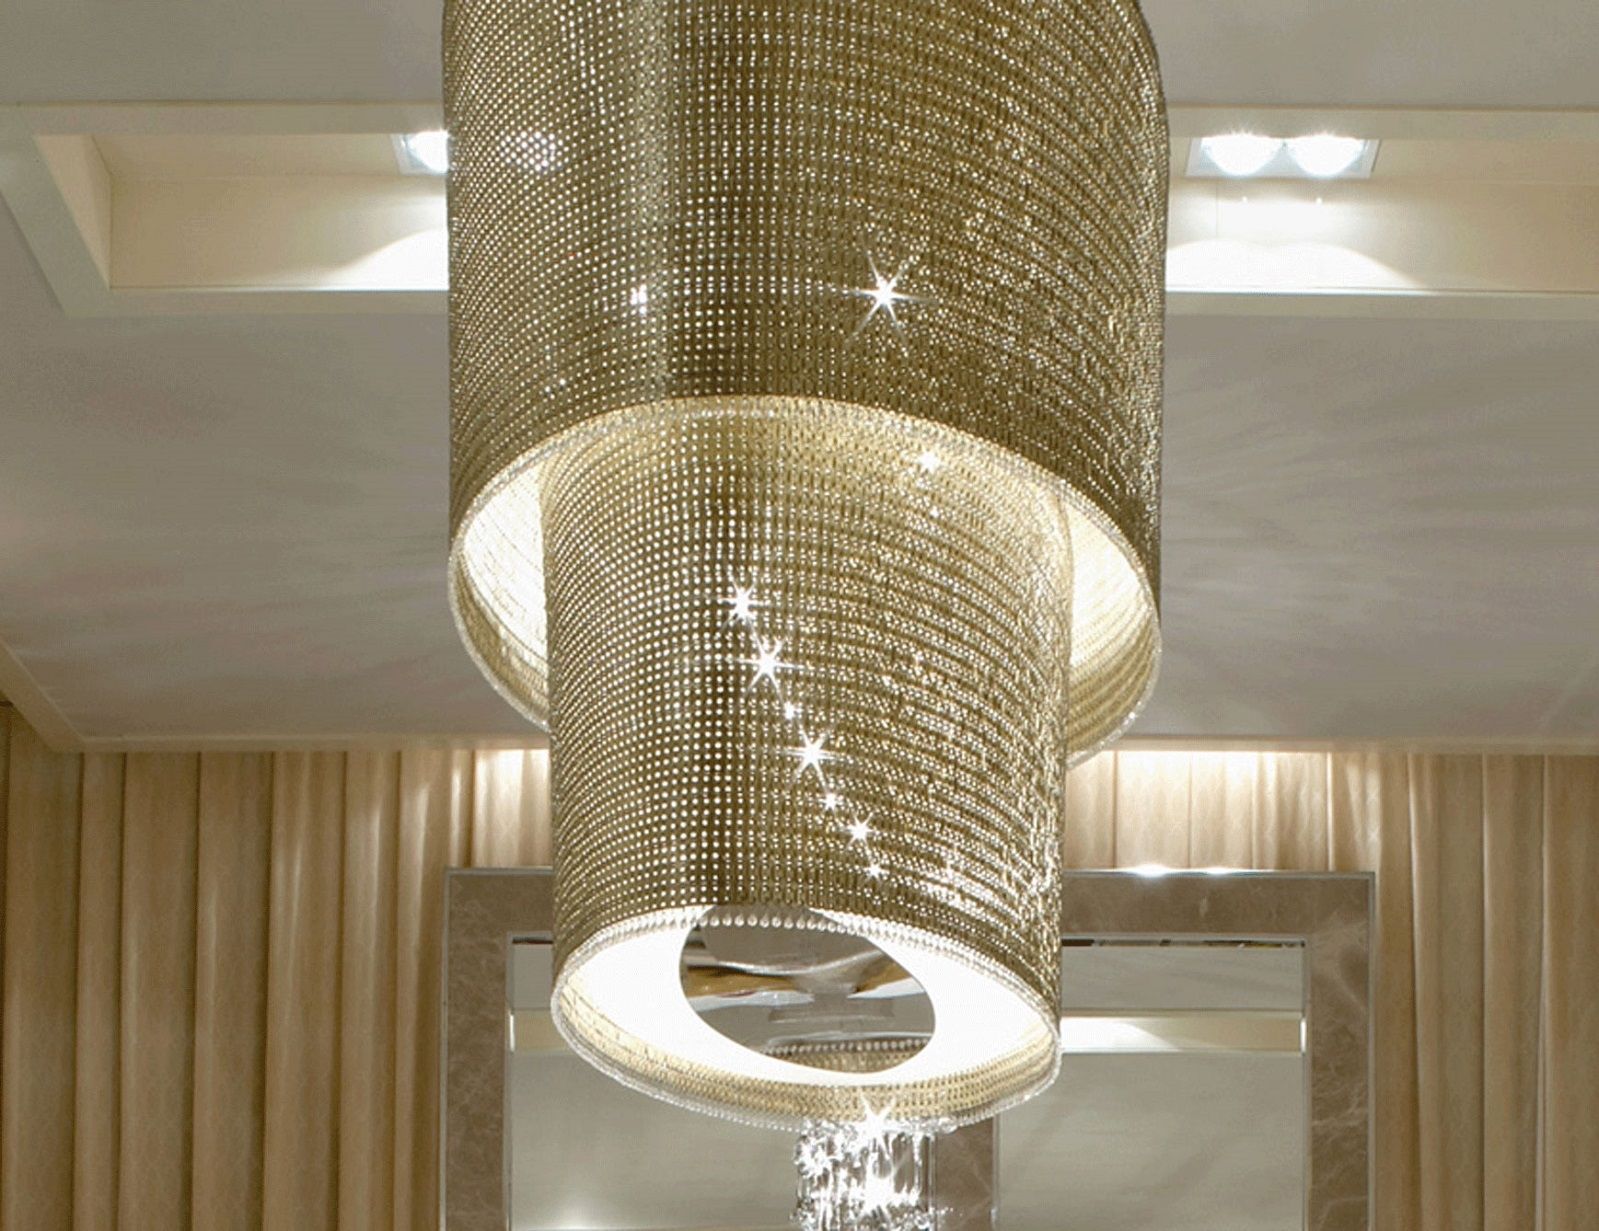 37 Best Hotel Chandeliers Images On Pinterest For Large Modern Chandeliers (View 5 of 12)